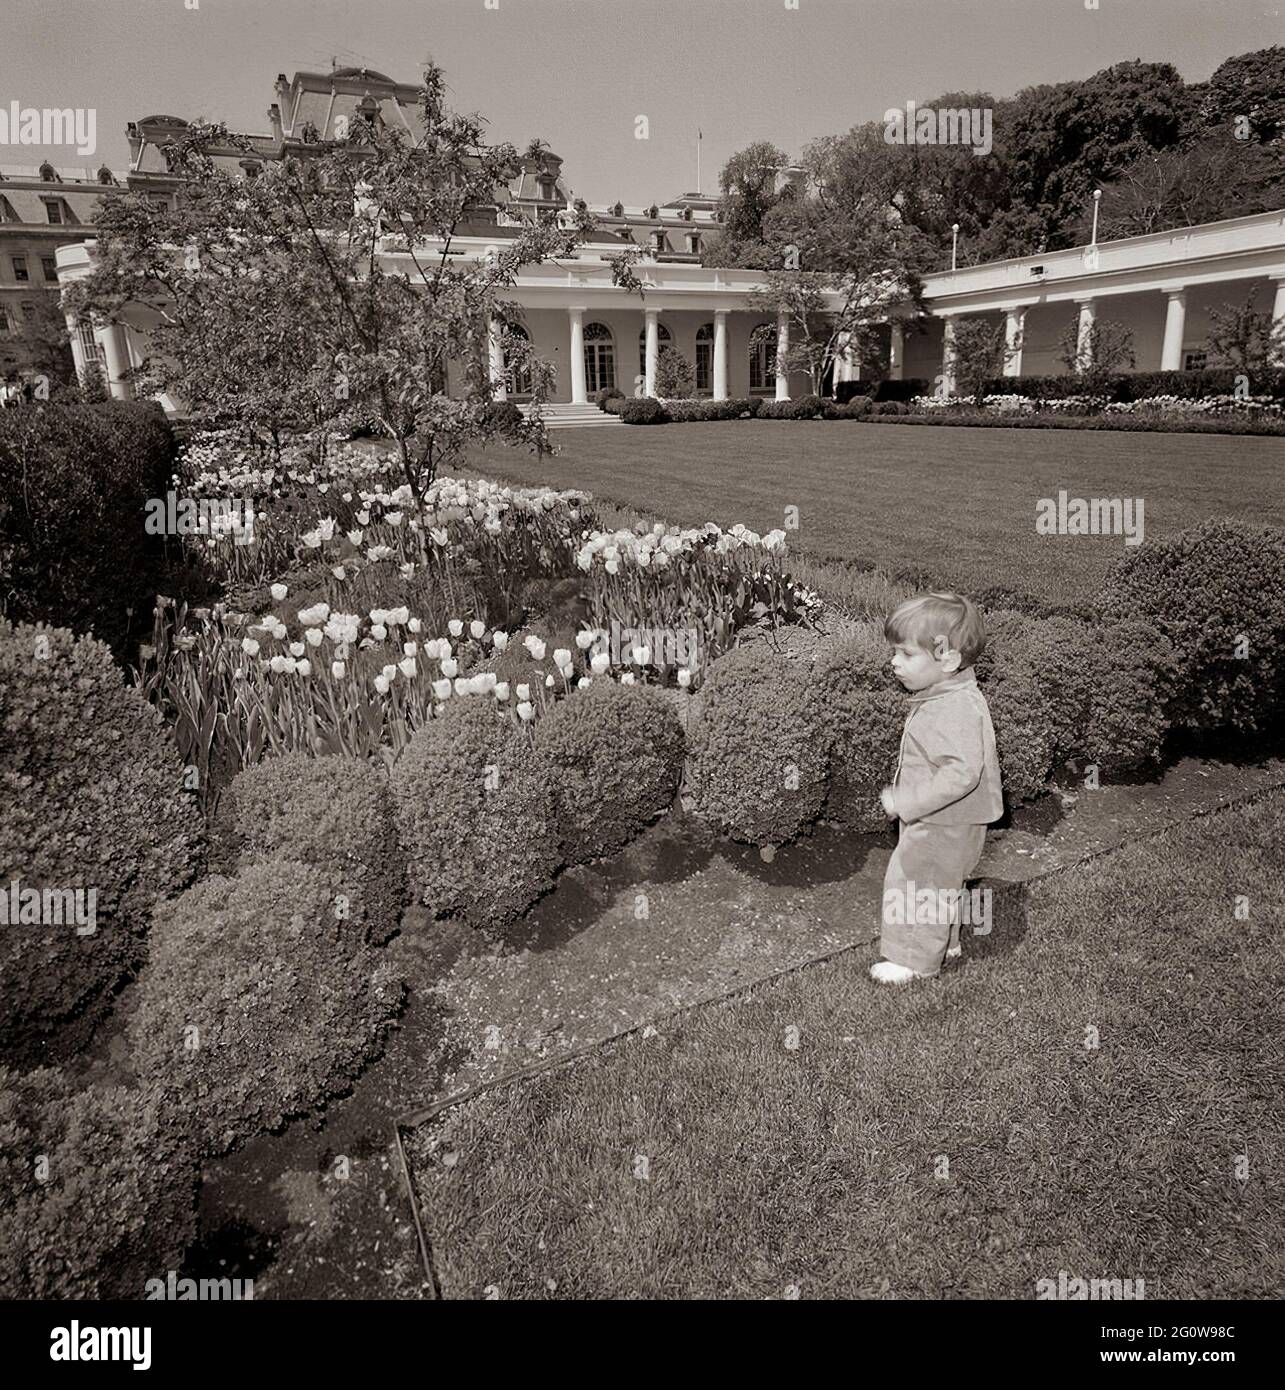 ST-C112-1-63                               26 April 1963  John F. Kennedy, (JFK, Jr.), in the Rose Garden  Please credit 'Cecil Stoughton. White House Photographs. John F. Kennedy Presidential Library and Museum, Boston' Stock Photo